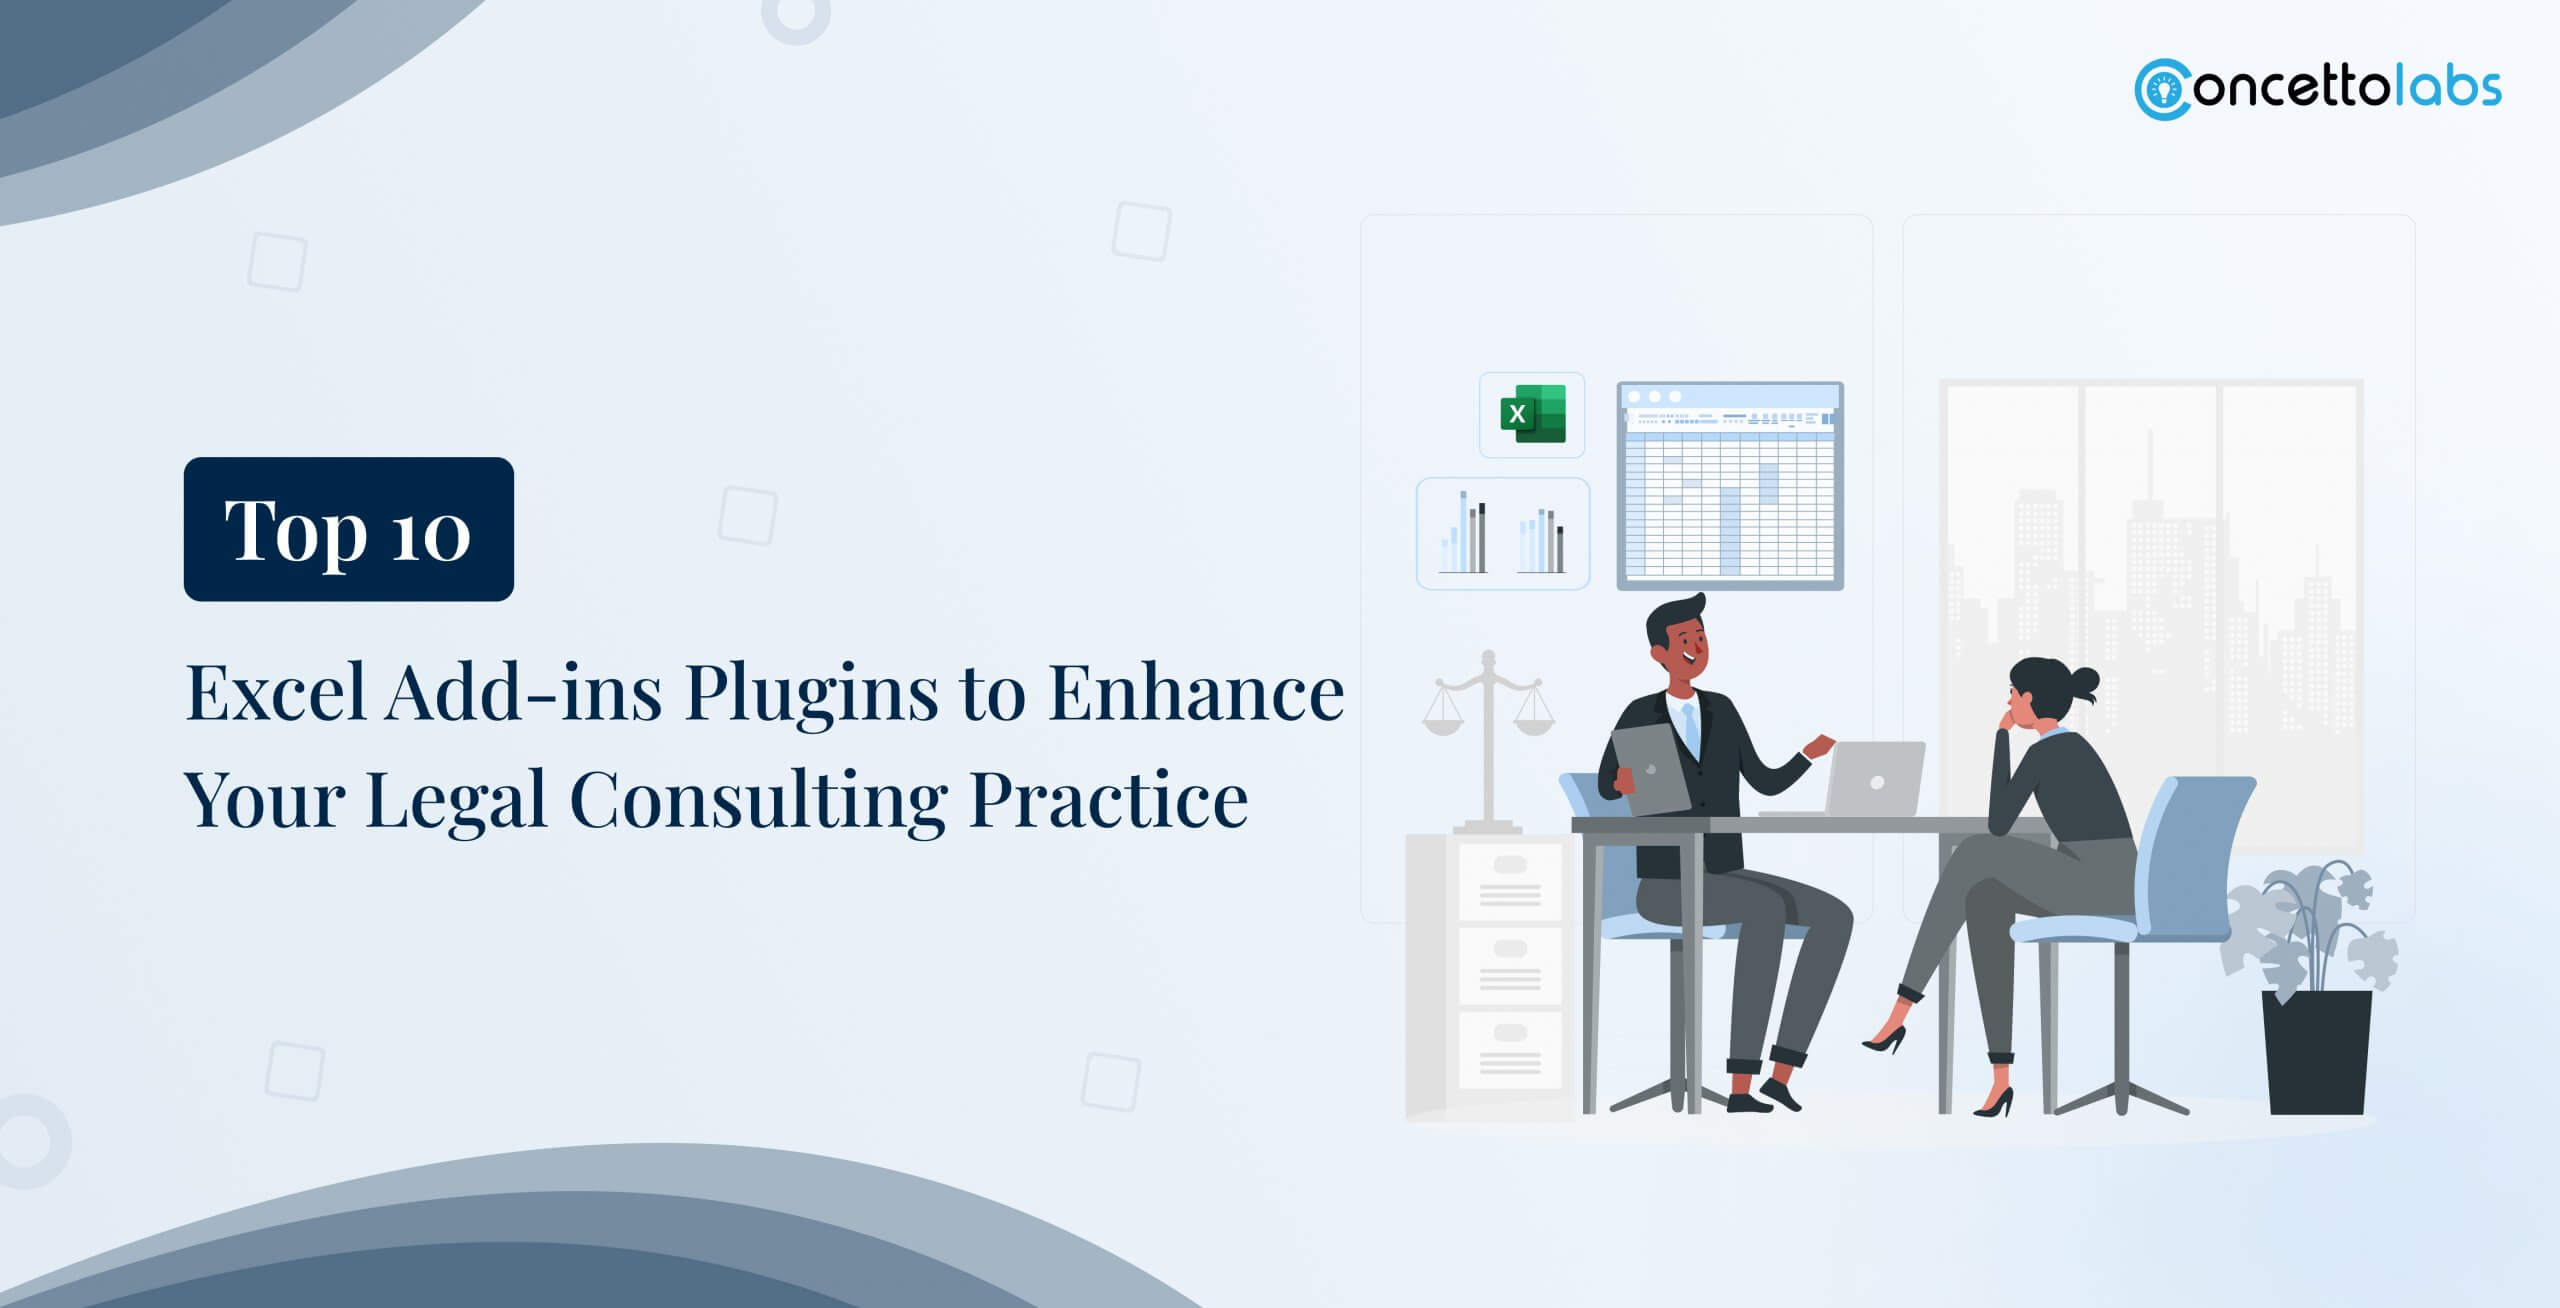 Top 10 Excel Add-ins Plugins to Enhance Your Legal Consulting Practice